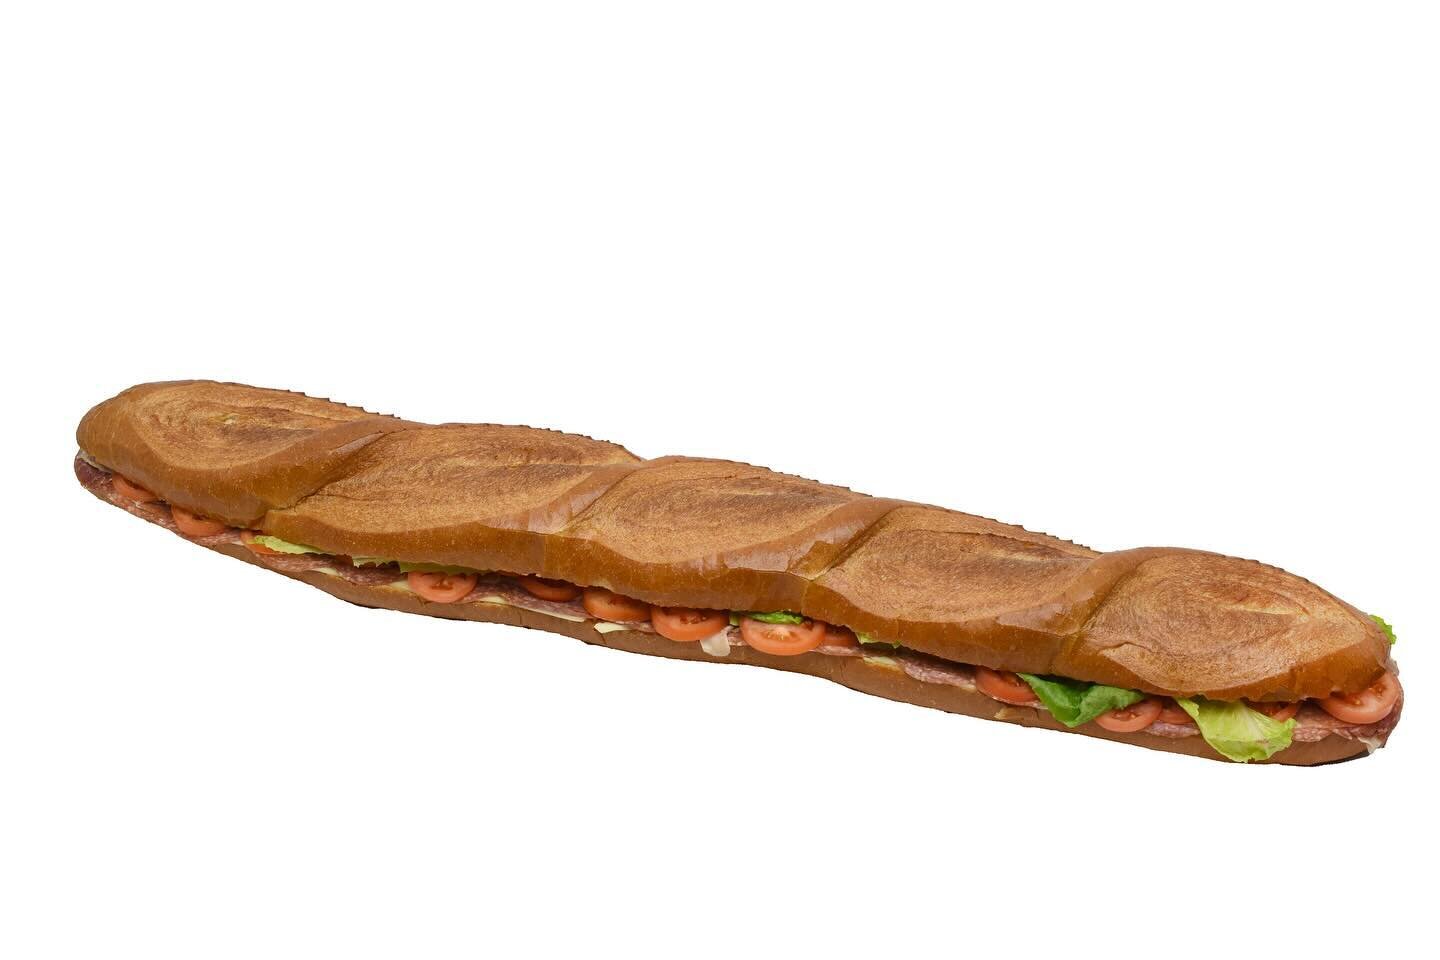 A Big Dude for a Big Game 🏈 order now your &ldquo;Picnic Sandwich Platter&rdquo; The Italian 🇮🇹&quot; 3-foot, or 6-foot bread, filled with Prosciutto, Salami, Provolone, Lettuce, Tomato, and Red Onions with the house Italian Dressing; cut in 18/36